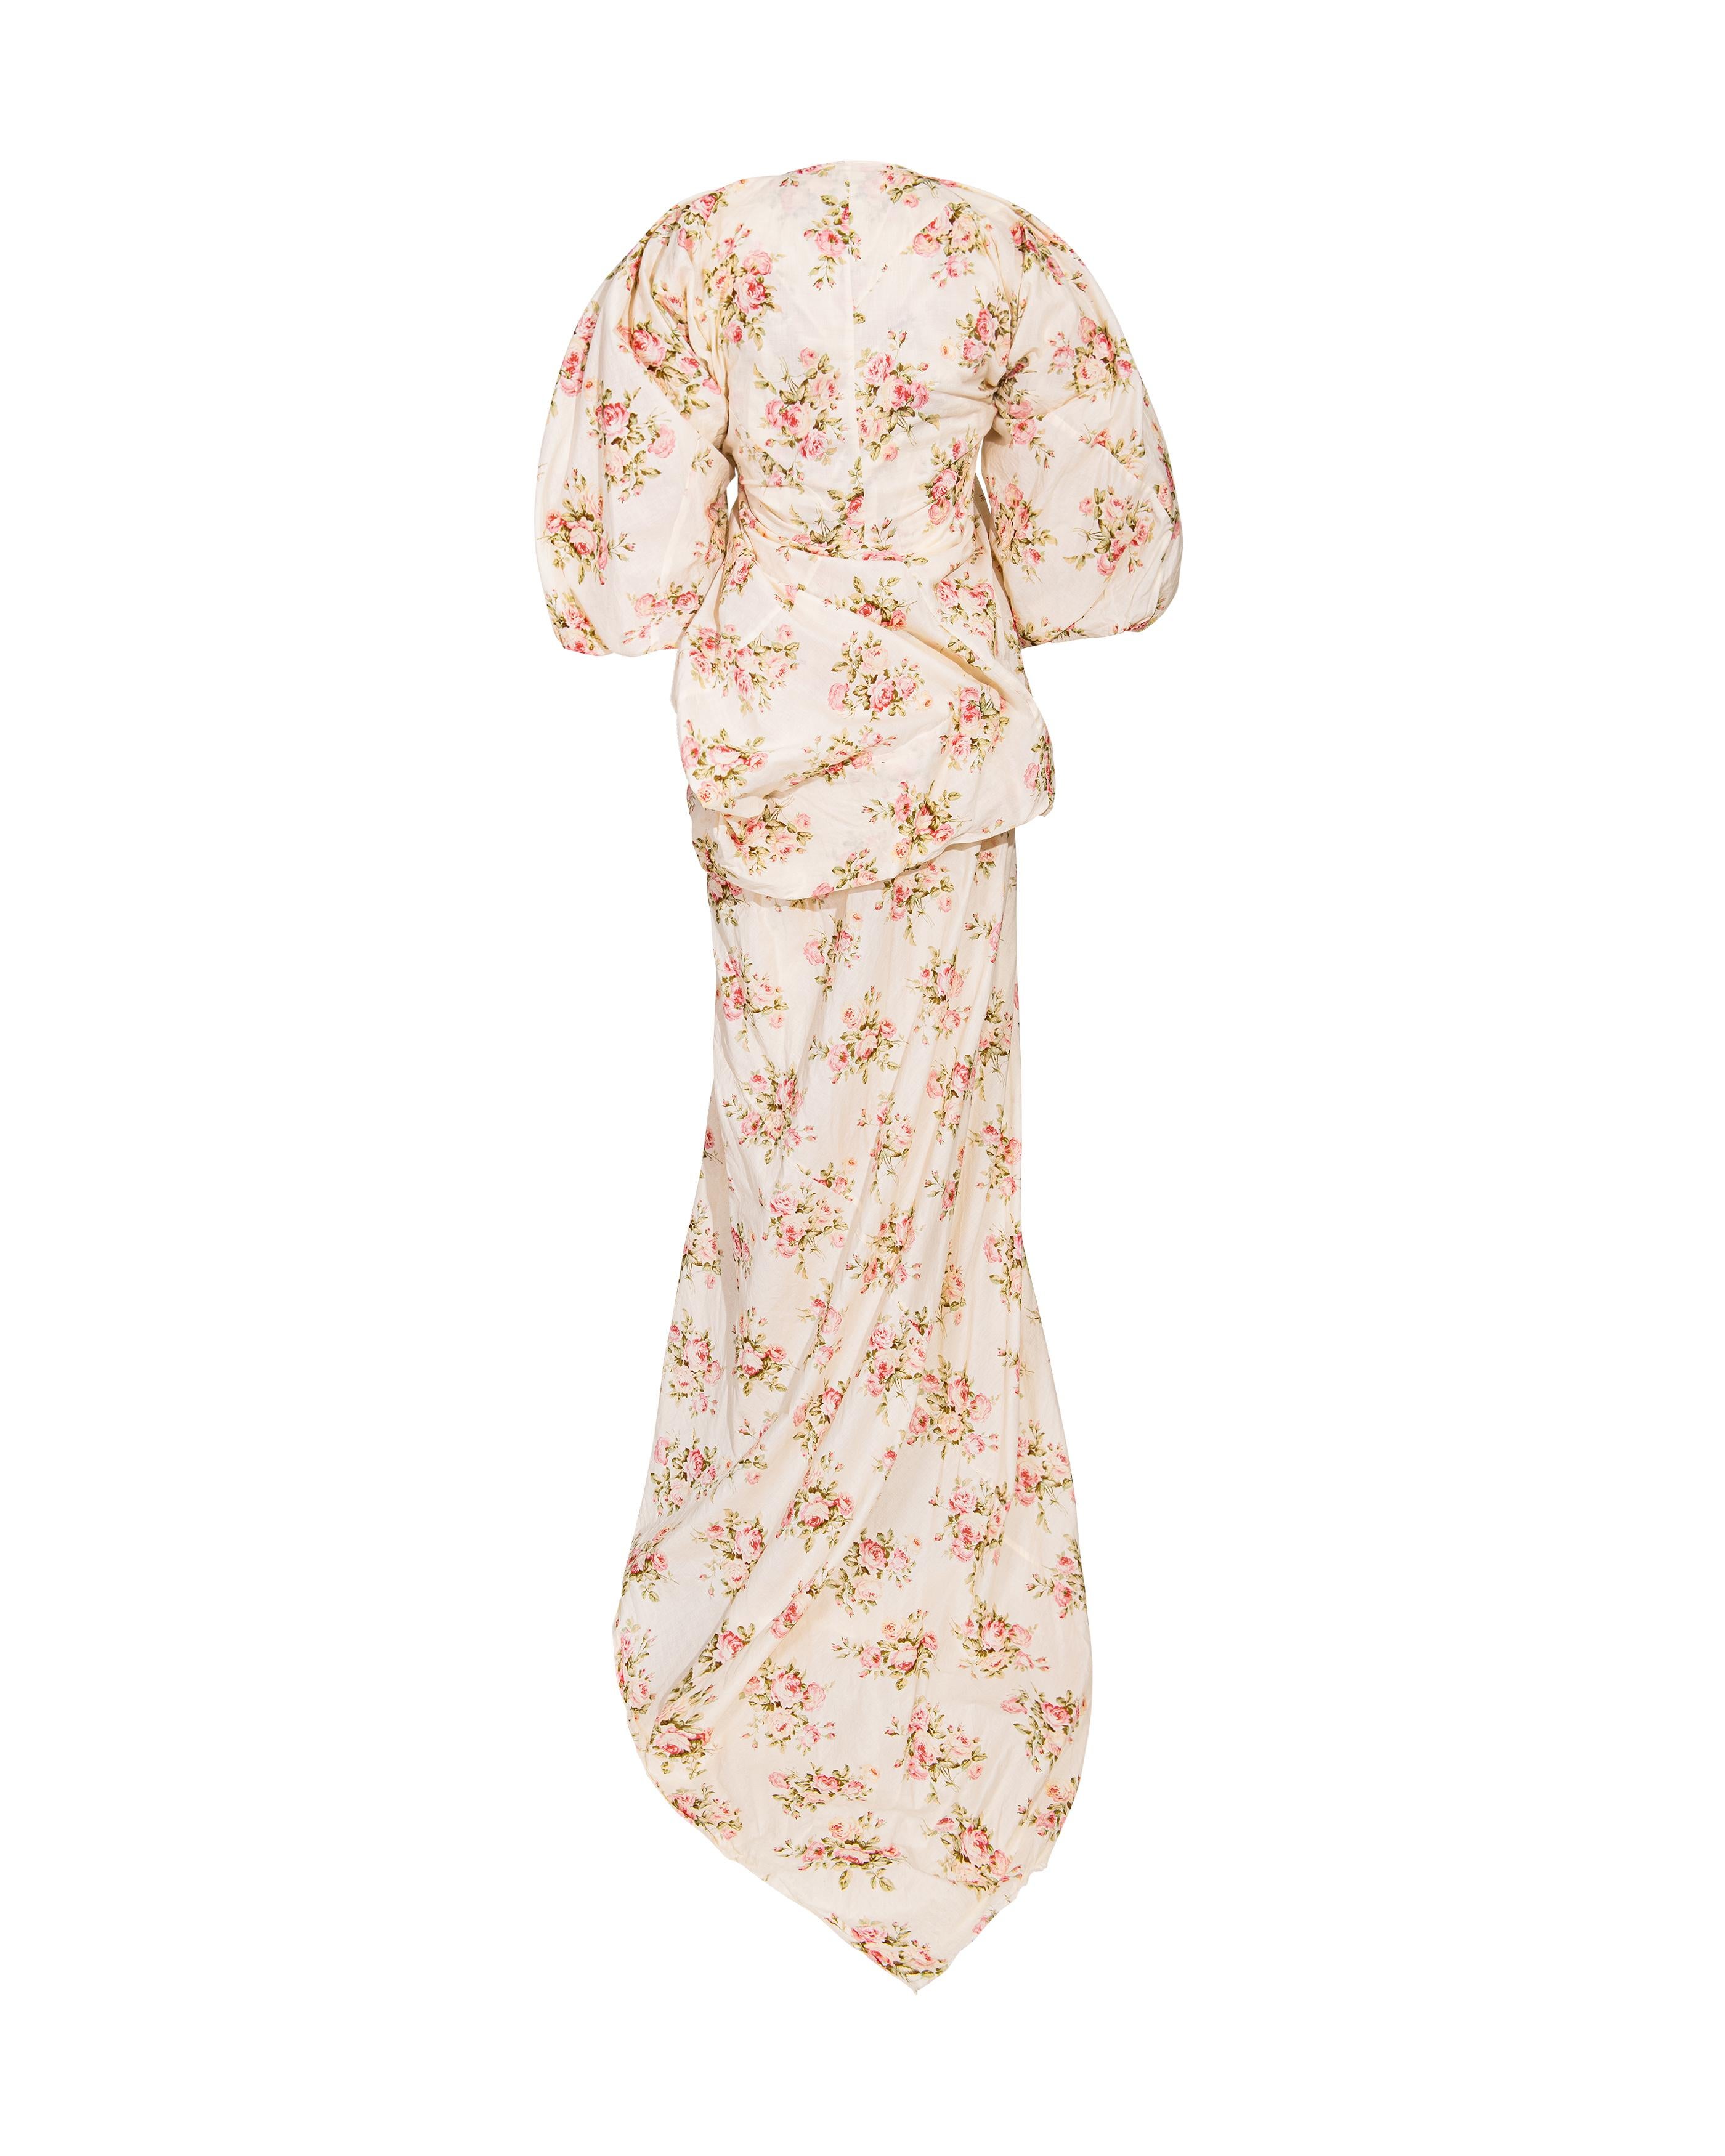 S/S 2008 Junya Watanabe Ecru Cotton Dress with Pink Floral Pattern For Sale 2